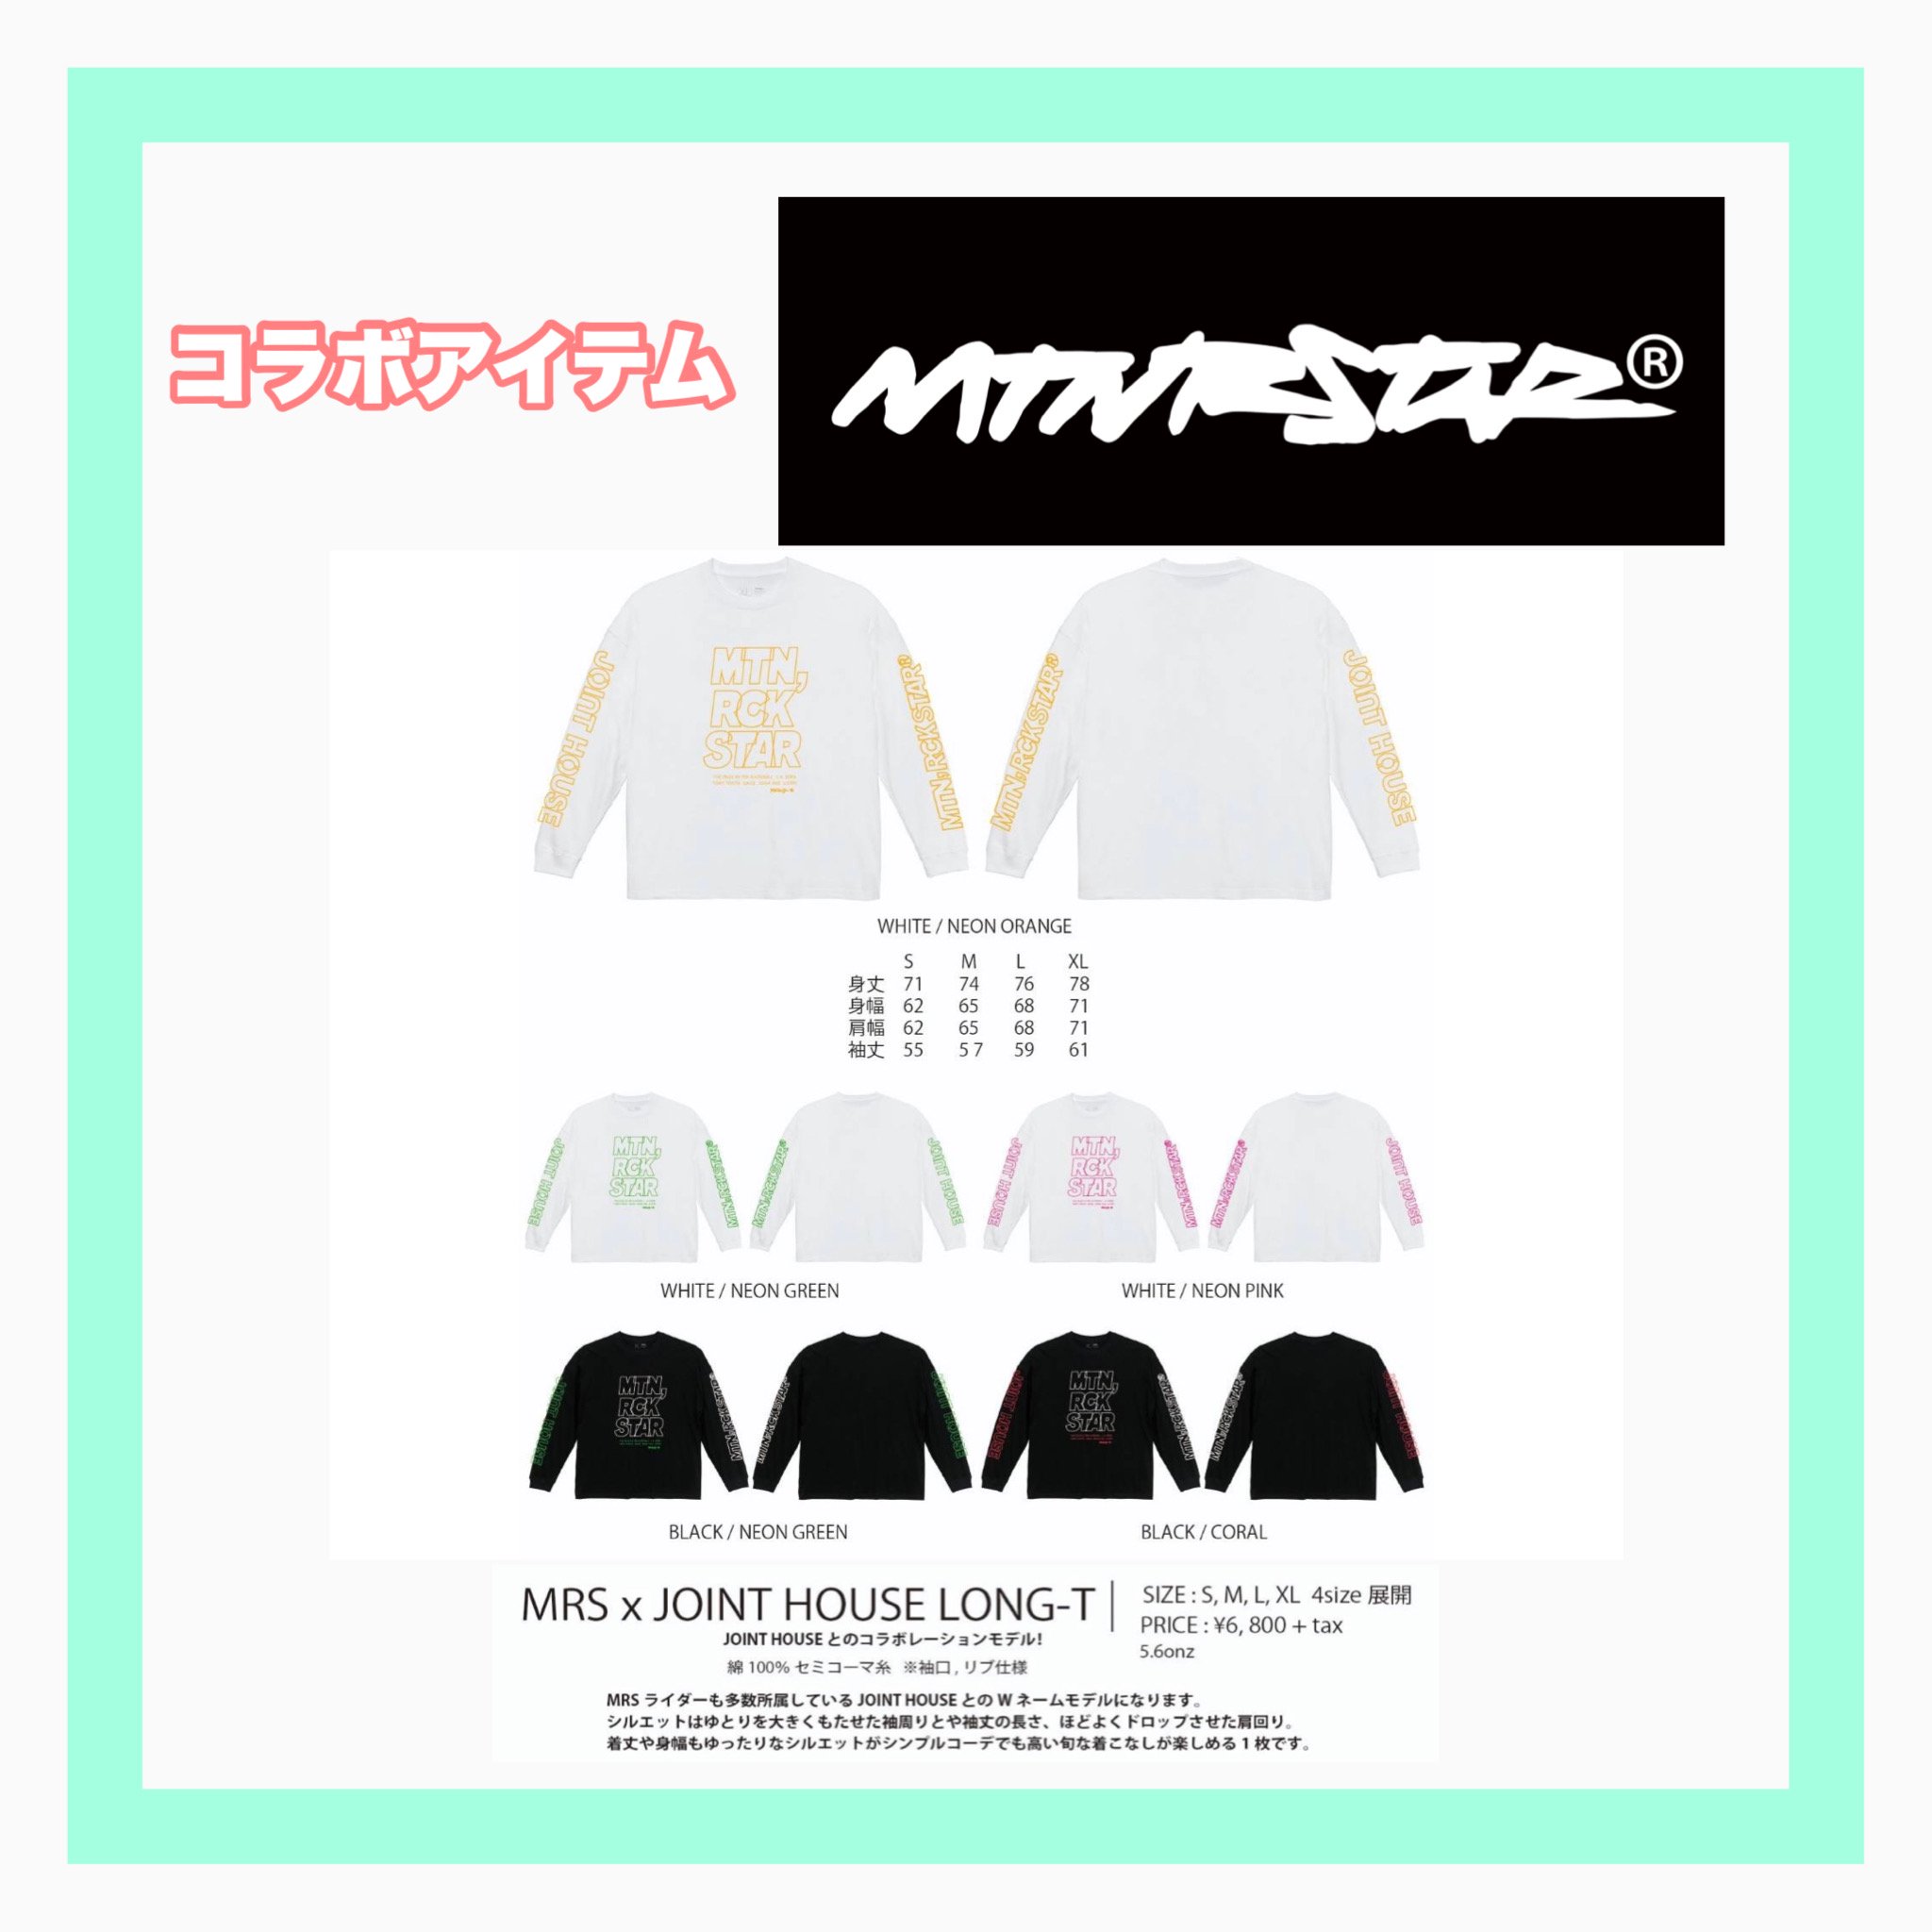 <img class='new_mark_img1' src='https://img.shop-pro.jp/img/new/icons14.gif' style='border:none;display:inline;margin:0px;padding:0px;width:auto;' />MOUNTAIN ROCK STAR Summer Apparel RECTANGLE BOX LONG-T x JOINT HOUSEܥǥ